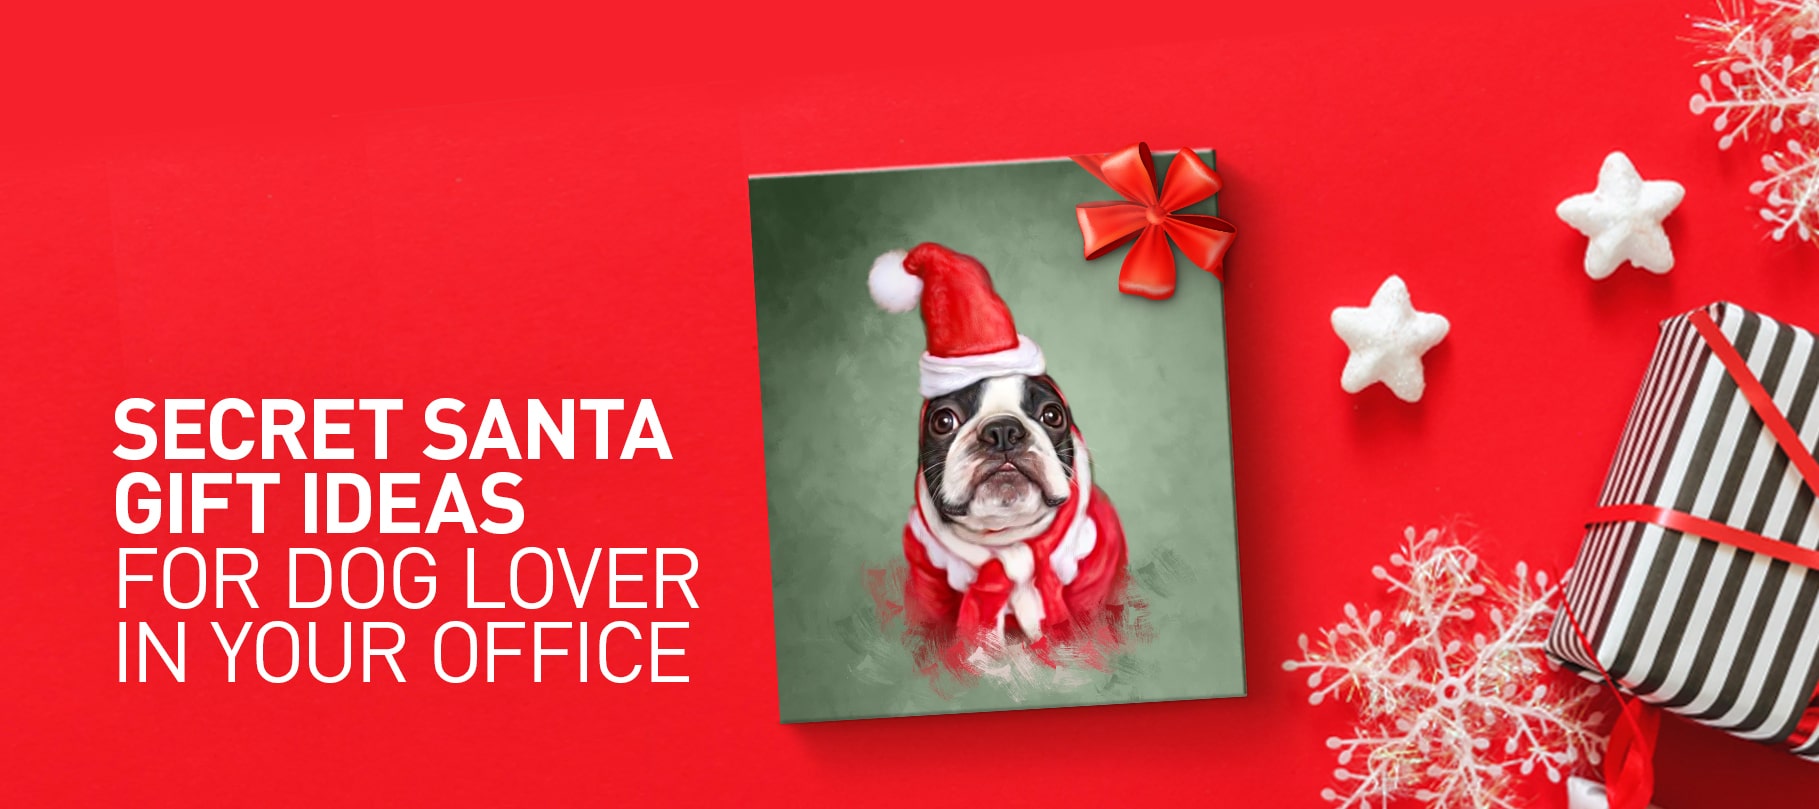 Secret Santa Gift Ideas For Dog Lovers In Your Office